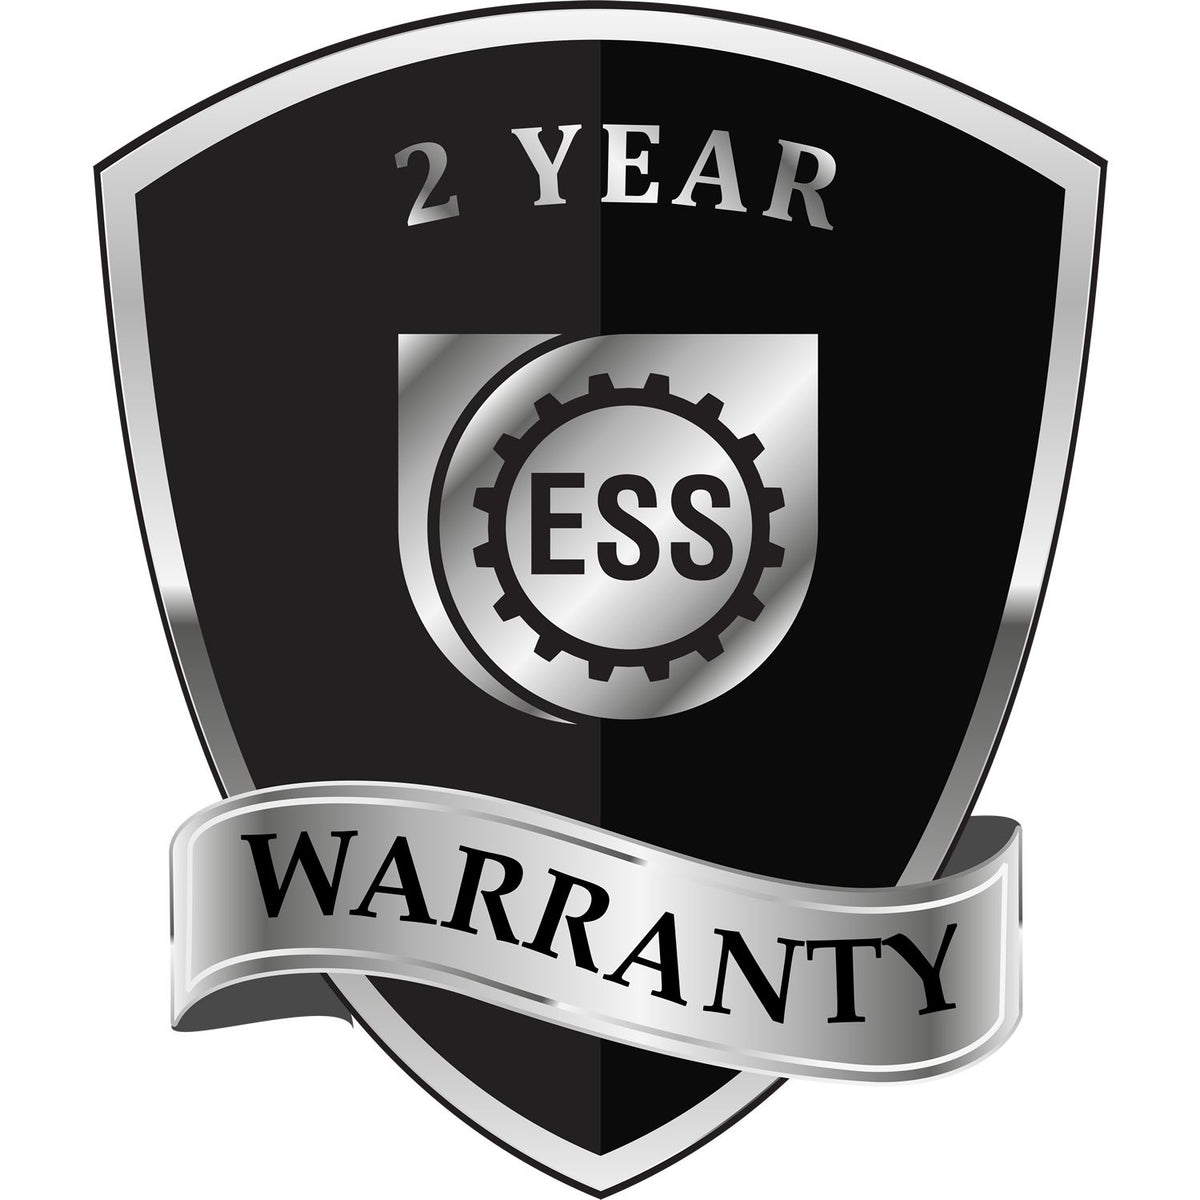 A badge or emblem showing a warranty icon for the Soft Wyoming Professional Engineer Seal